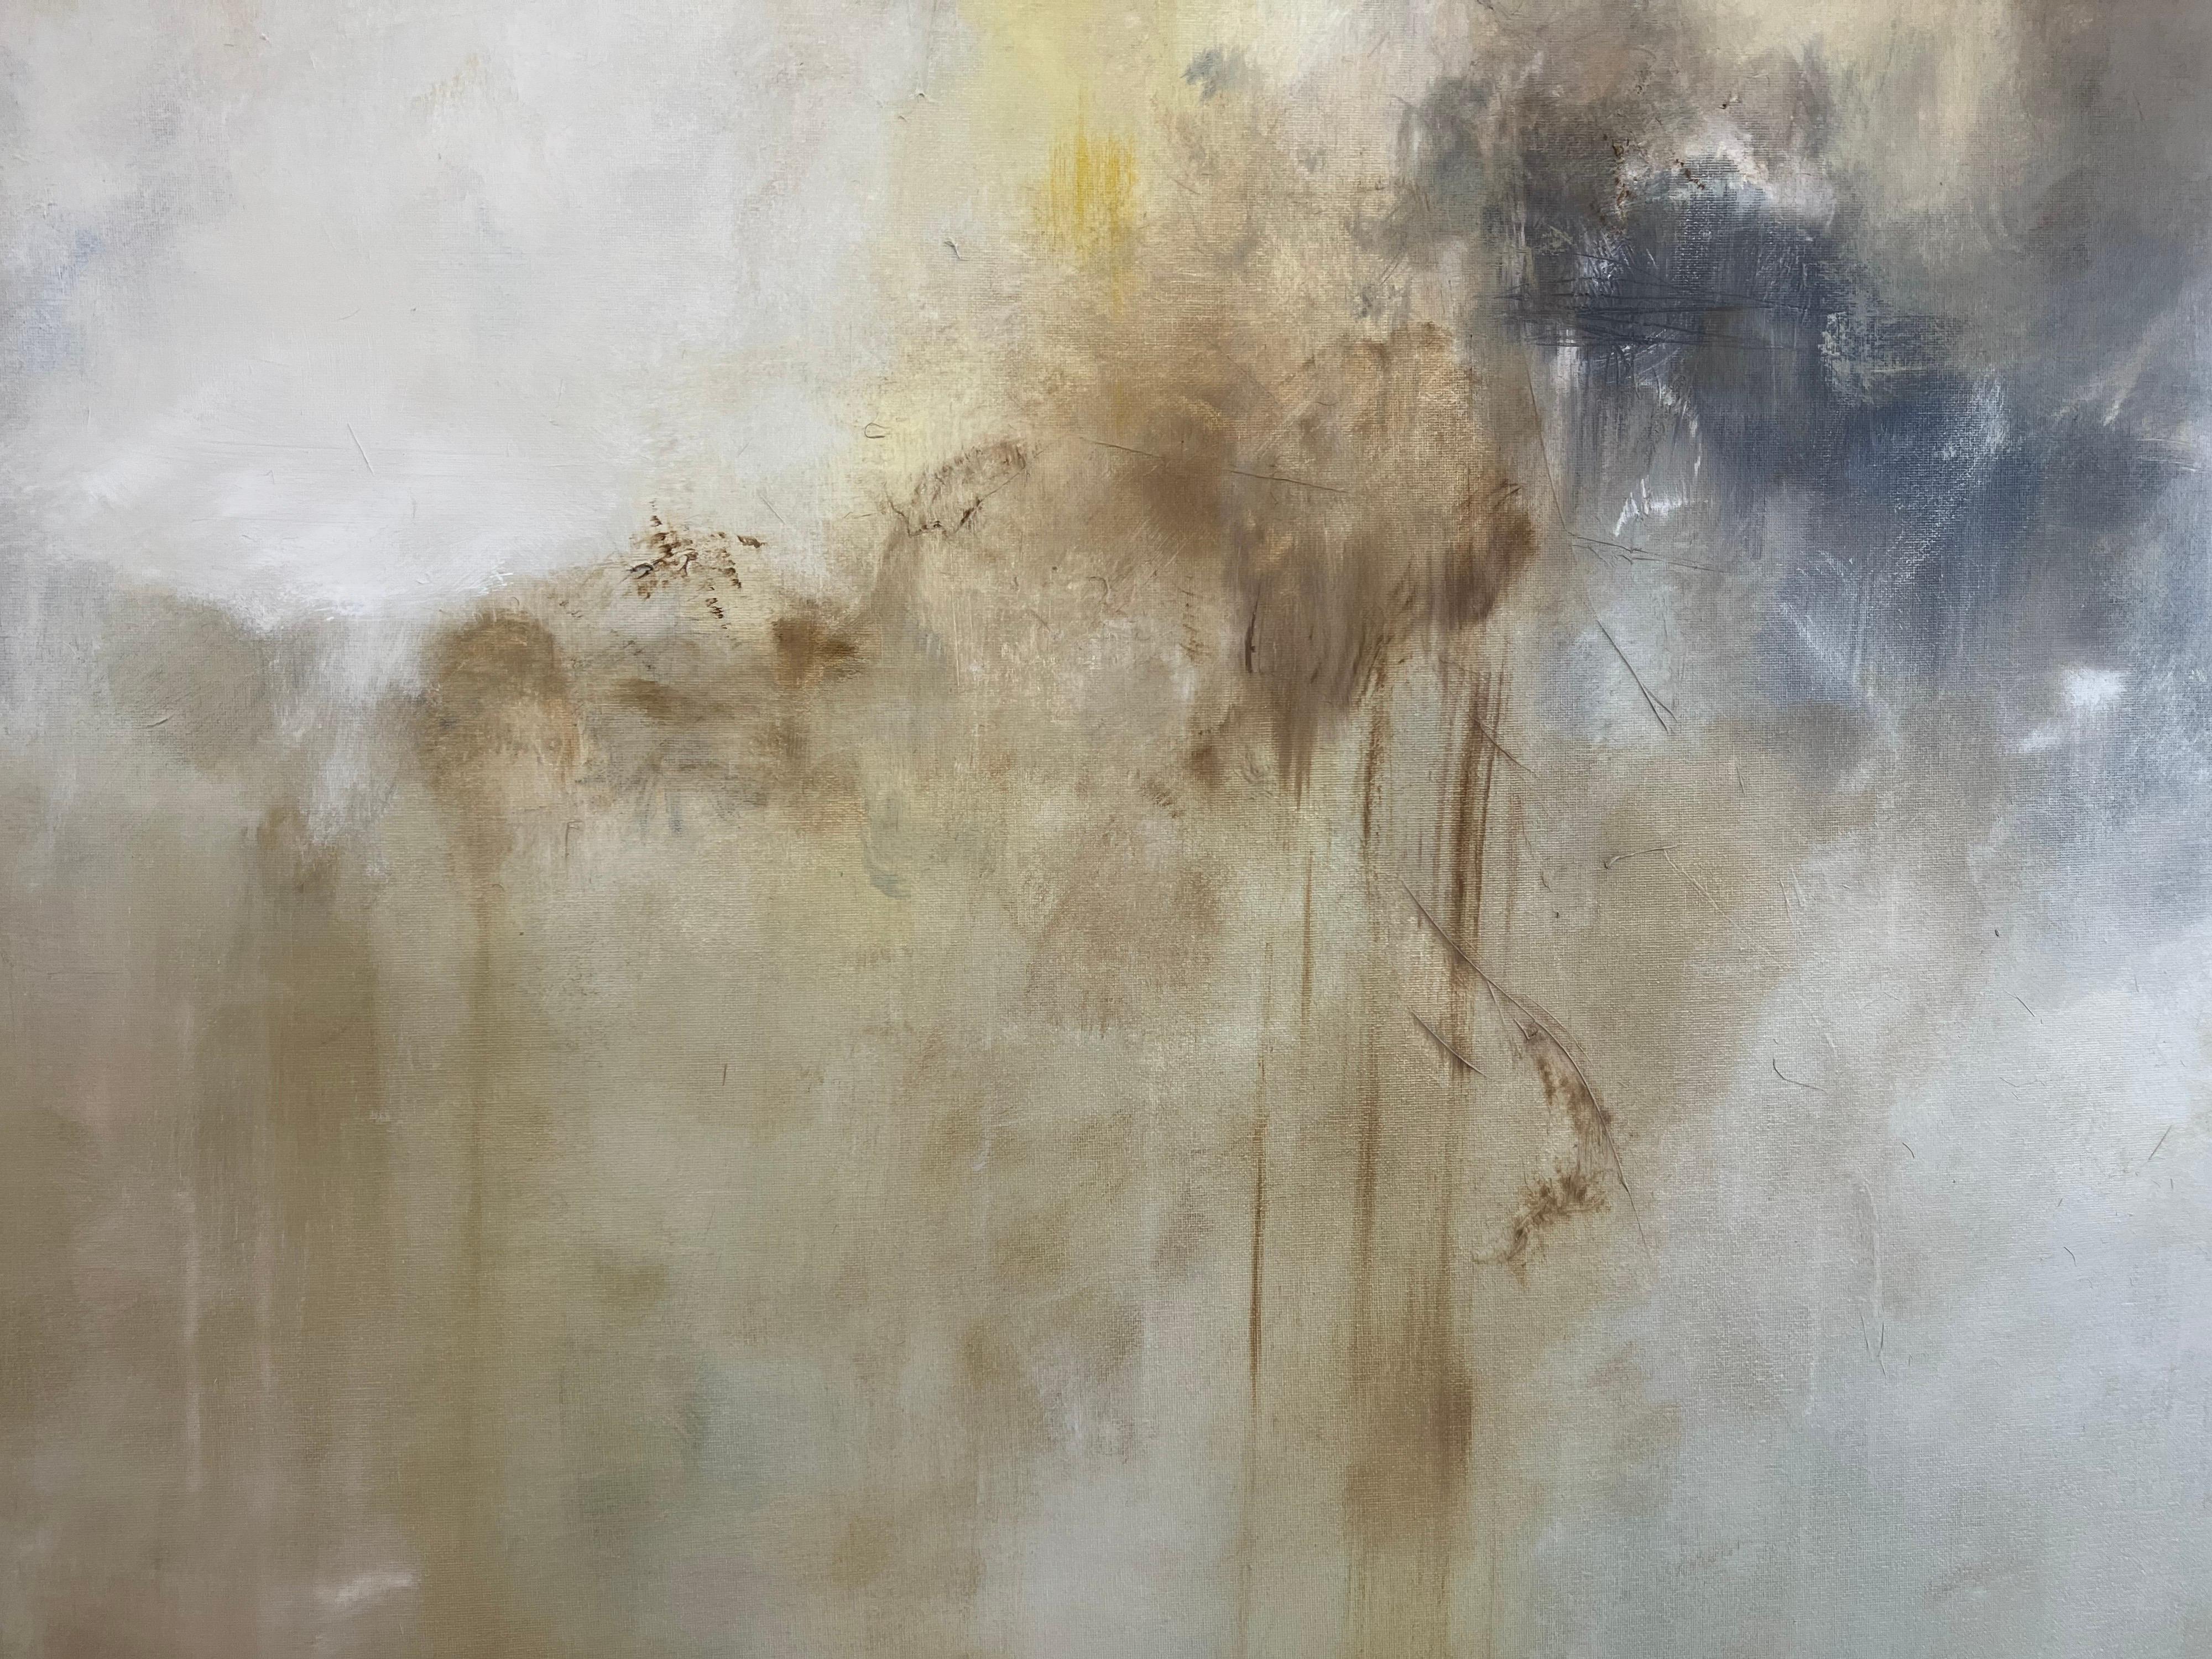 Golden Hour by Lily Harrington, Large Abstract Painting on Canvas 1